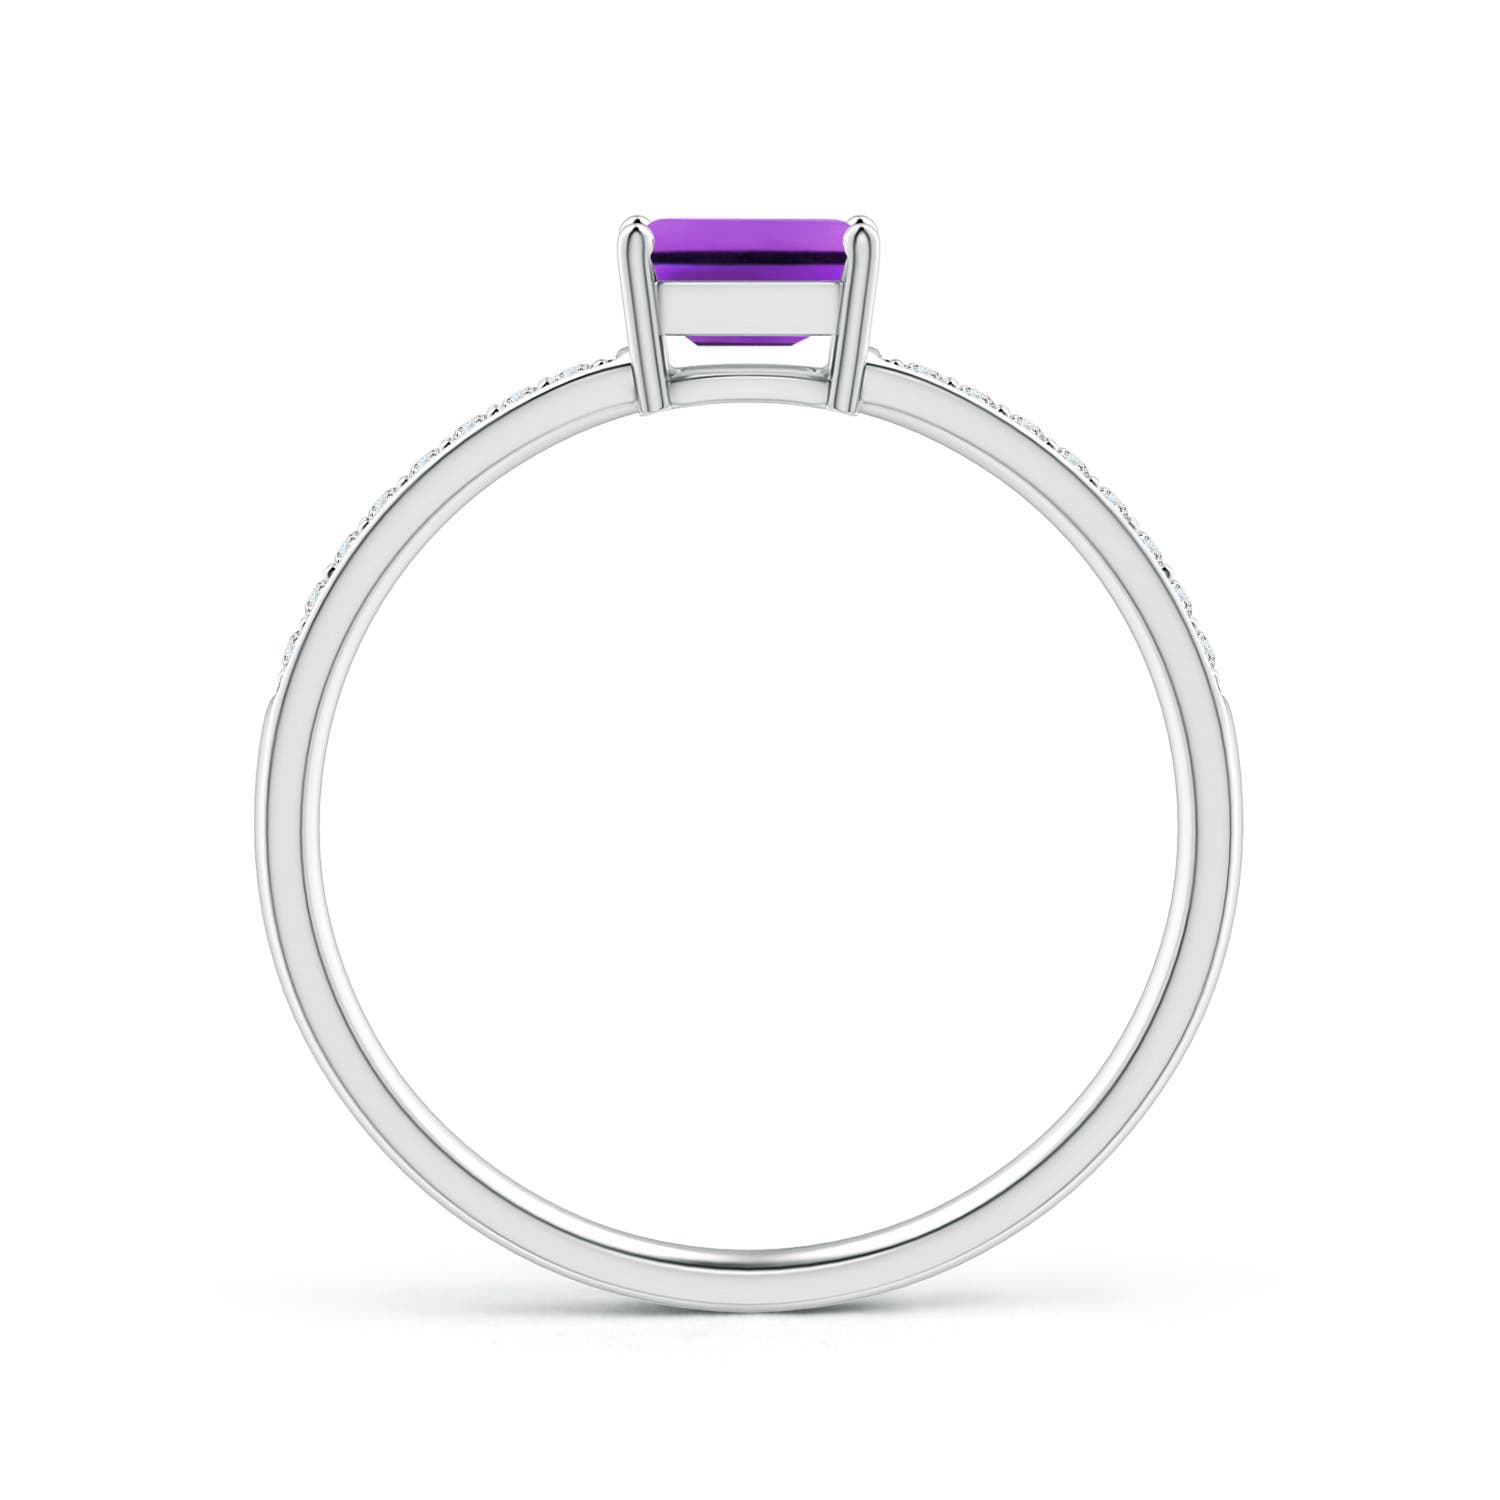 AAA - Amethyst / 0.33 CT / 14 KT White Gold